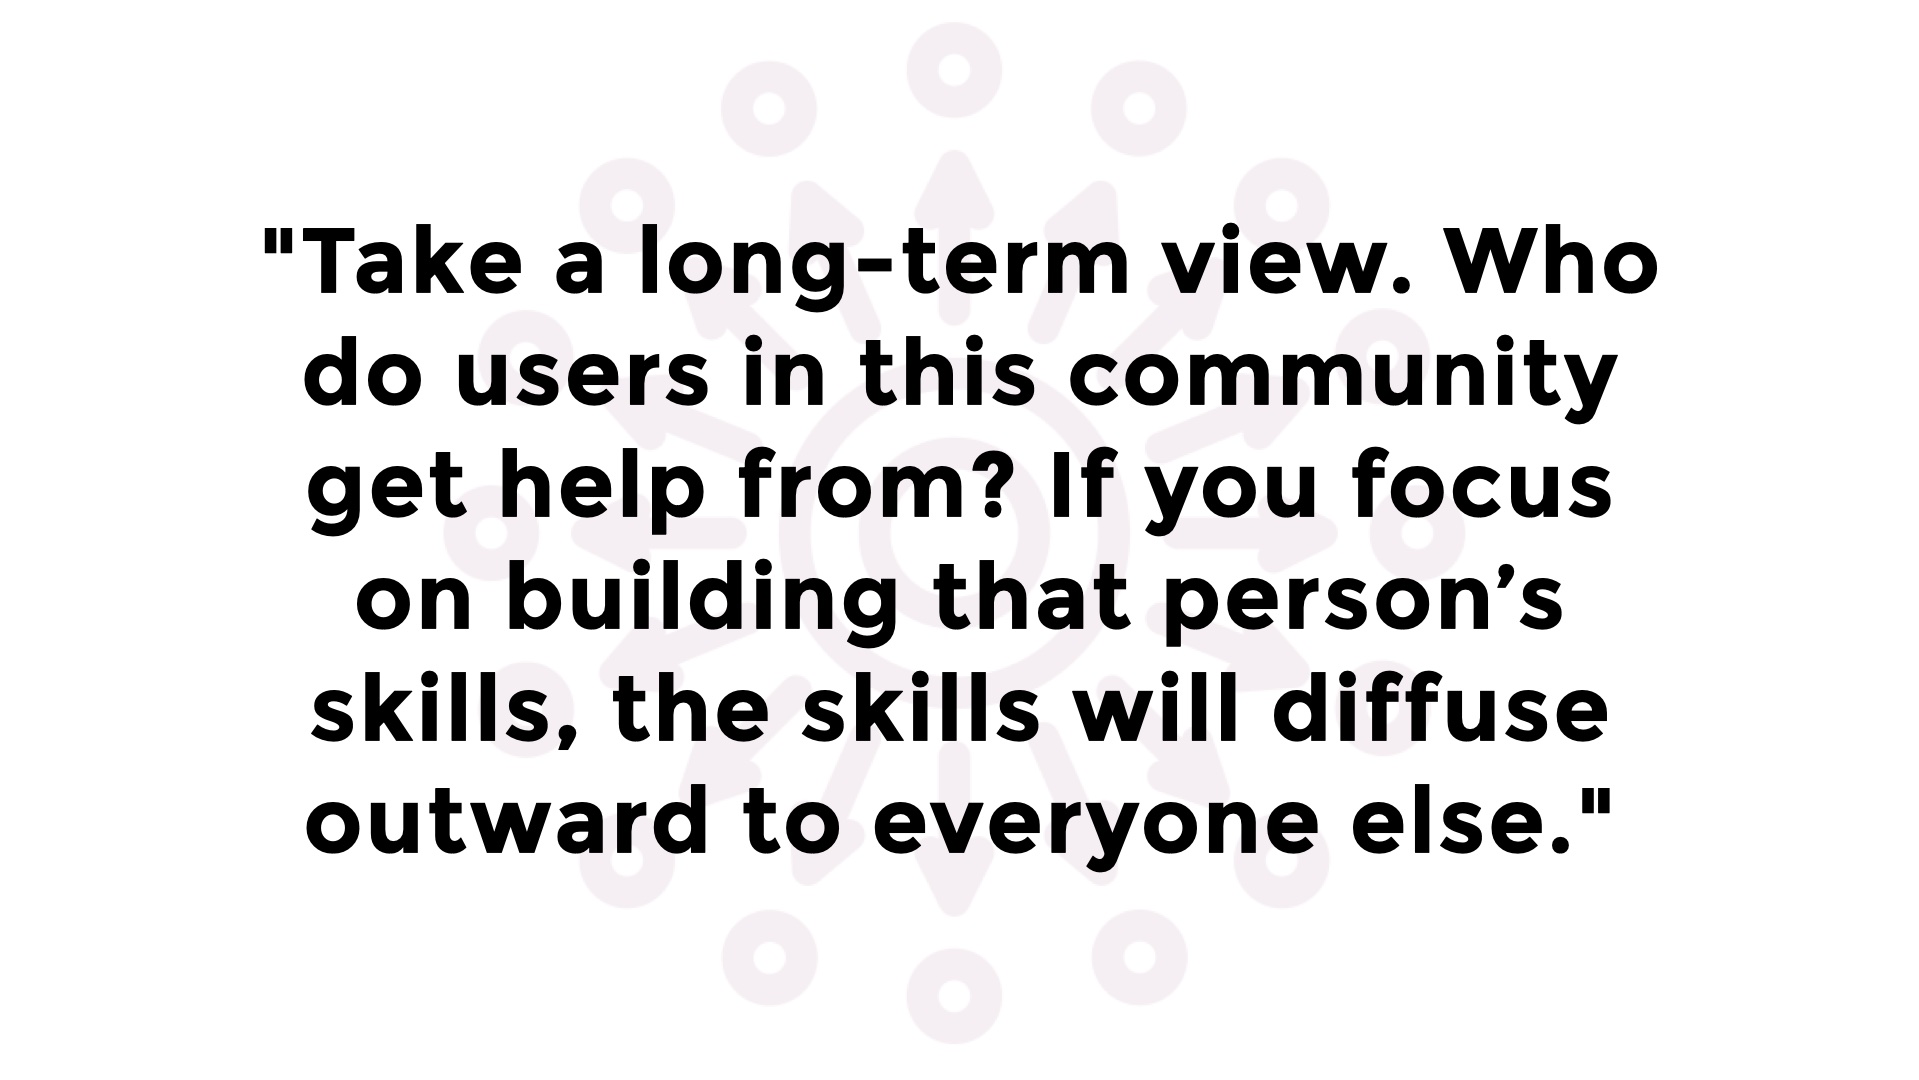 Quotation: 'Take a long-term view. Who do users in this community get help from? If you focus on building that person’s skills, the skills will diffuse outward to everyone else.'